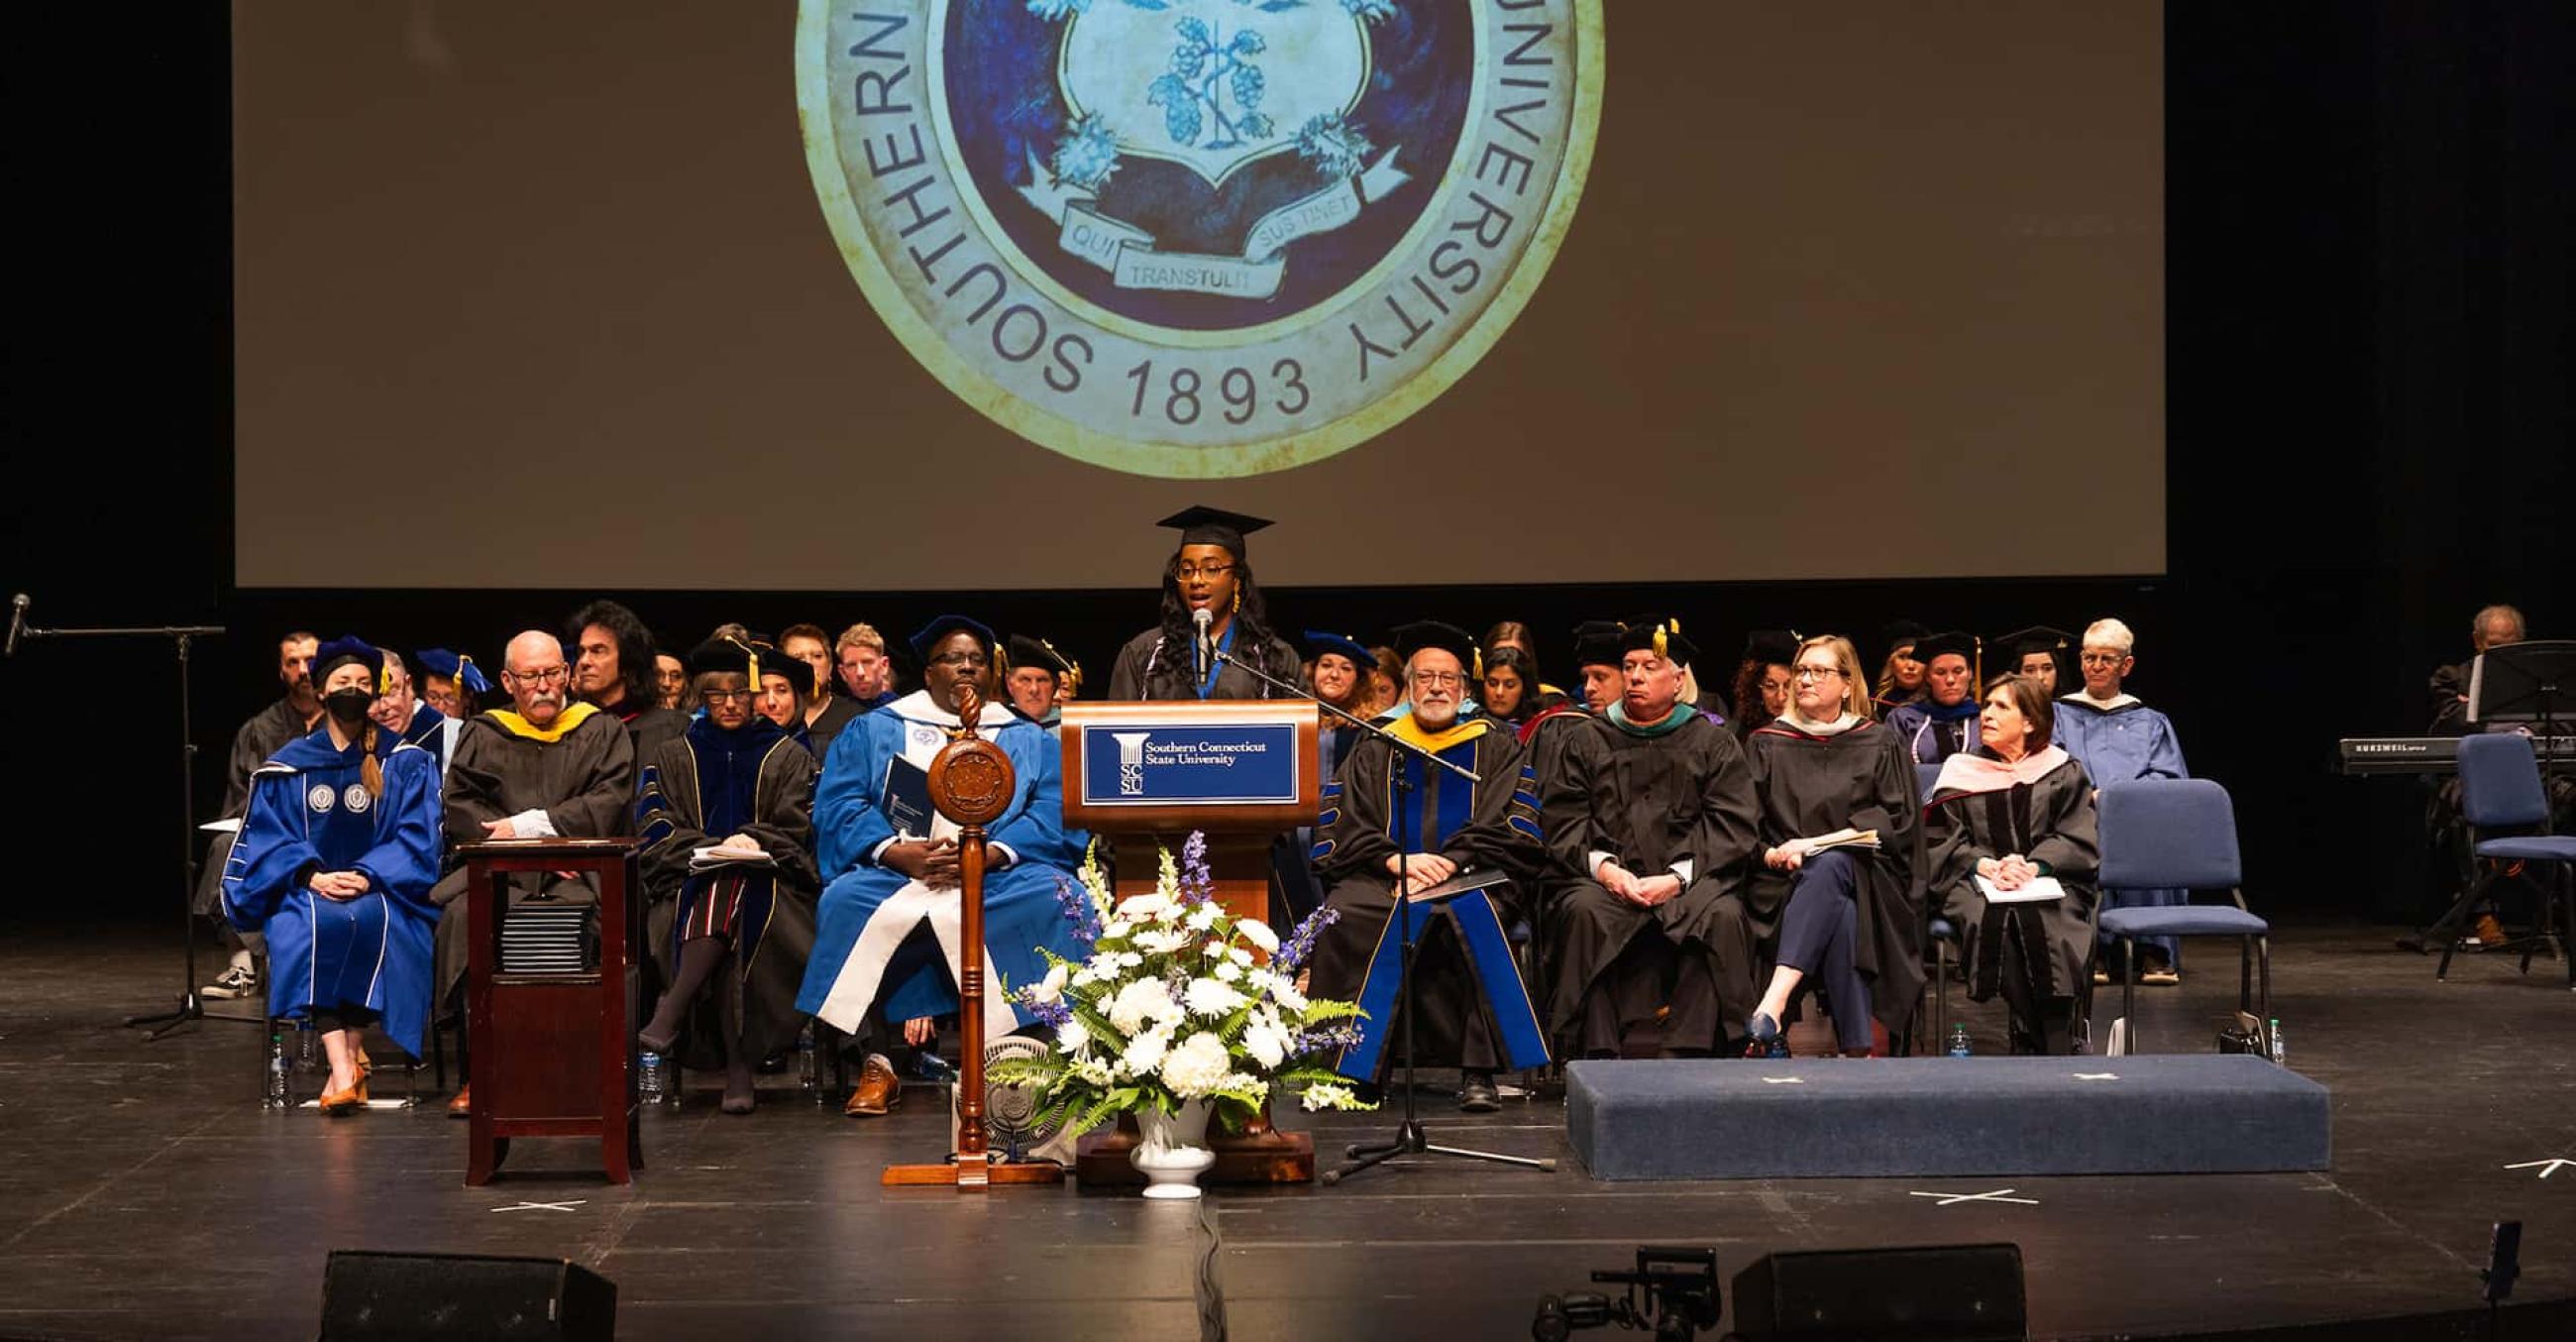 faculty and administrators in academic regalia sit on the Lyman Center stage as a student wearing a graduation cap and gown speaks at the podium